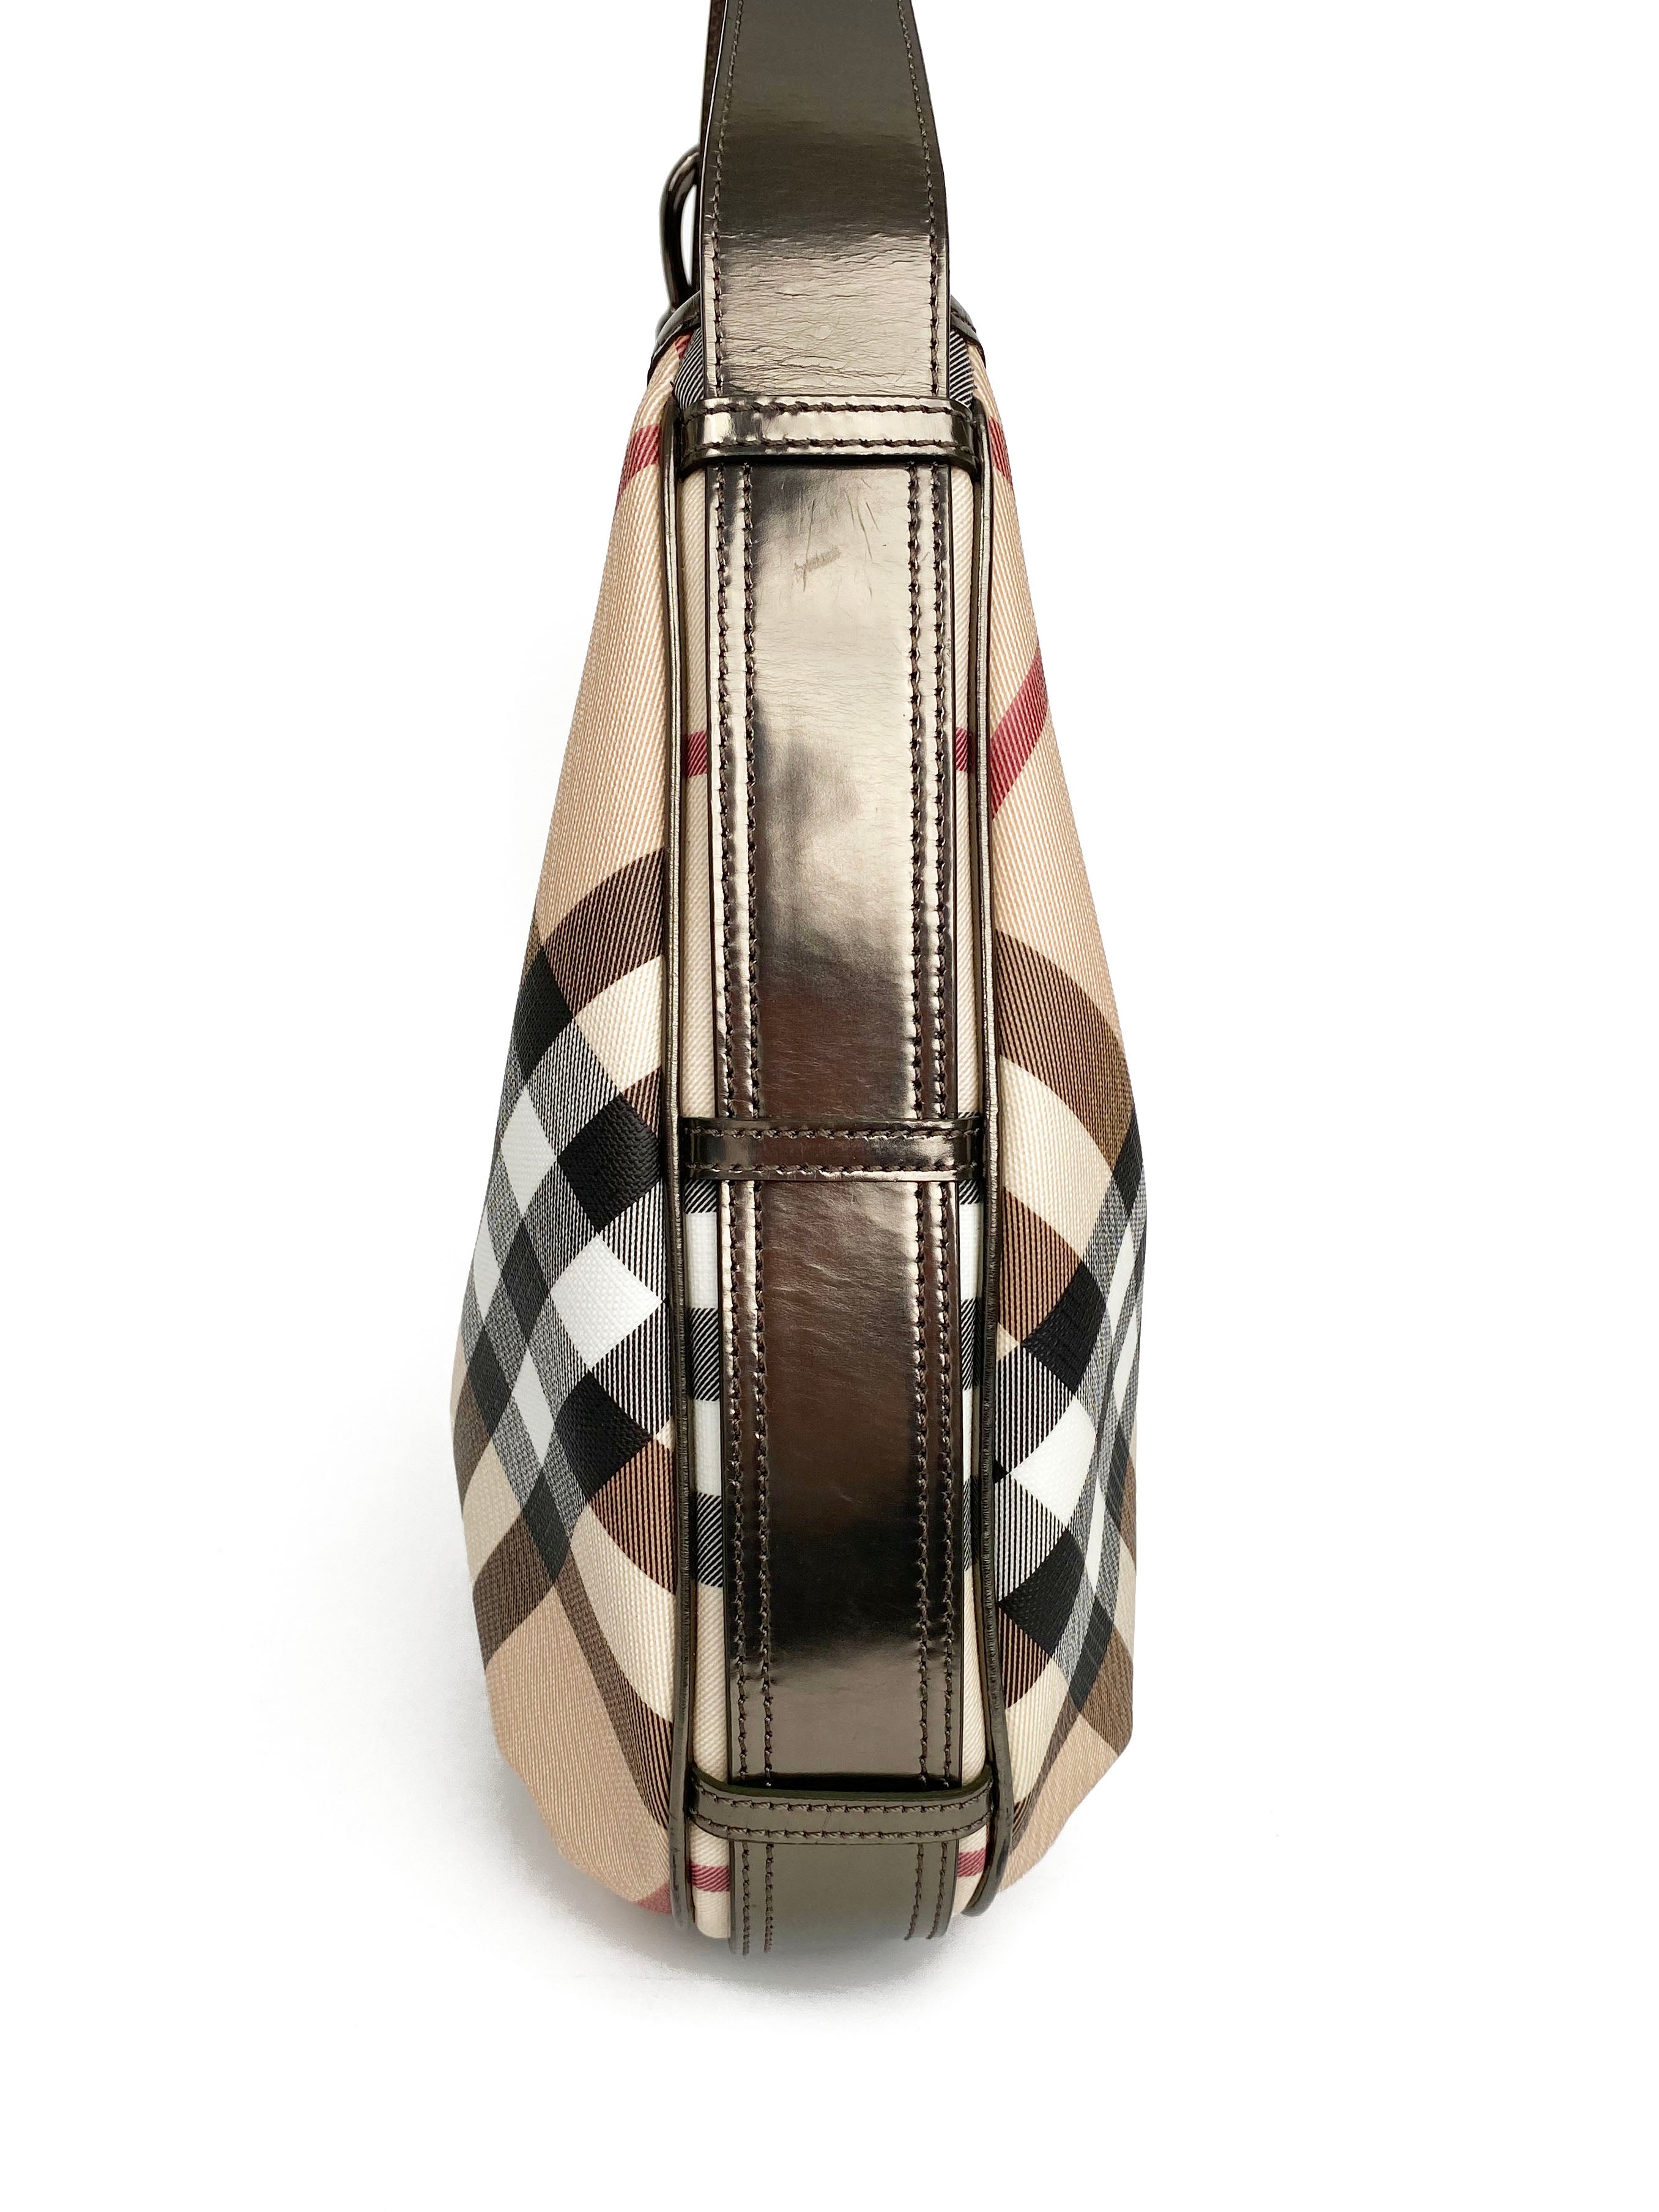 Burberry Large Haymarket Check Tote